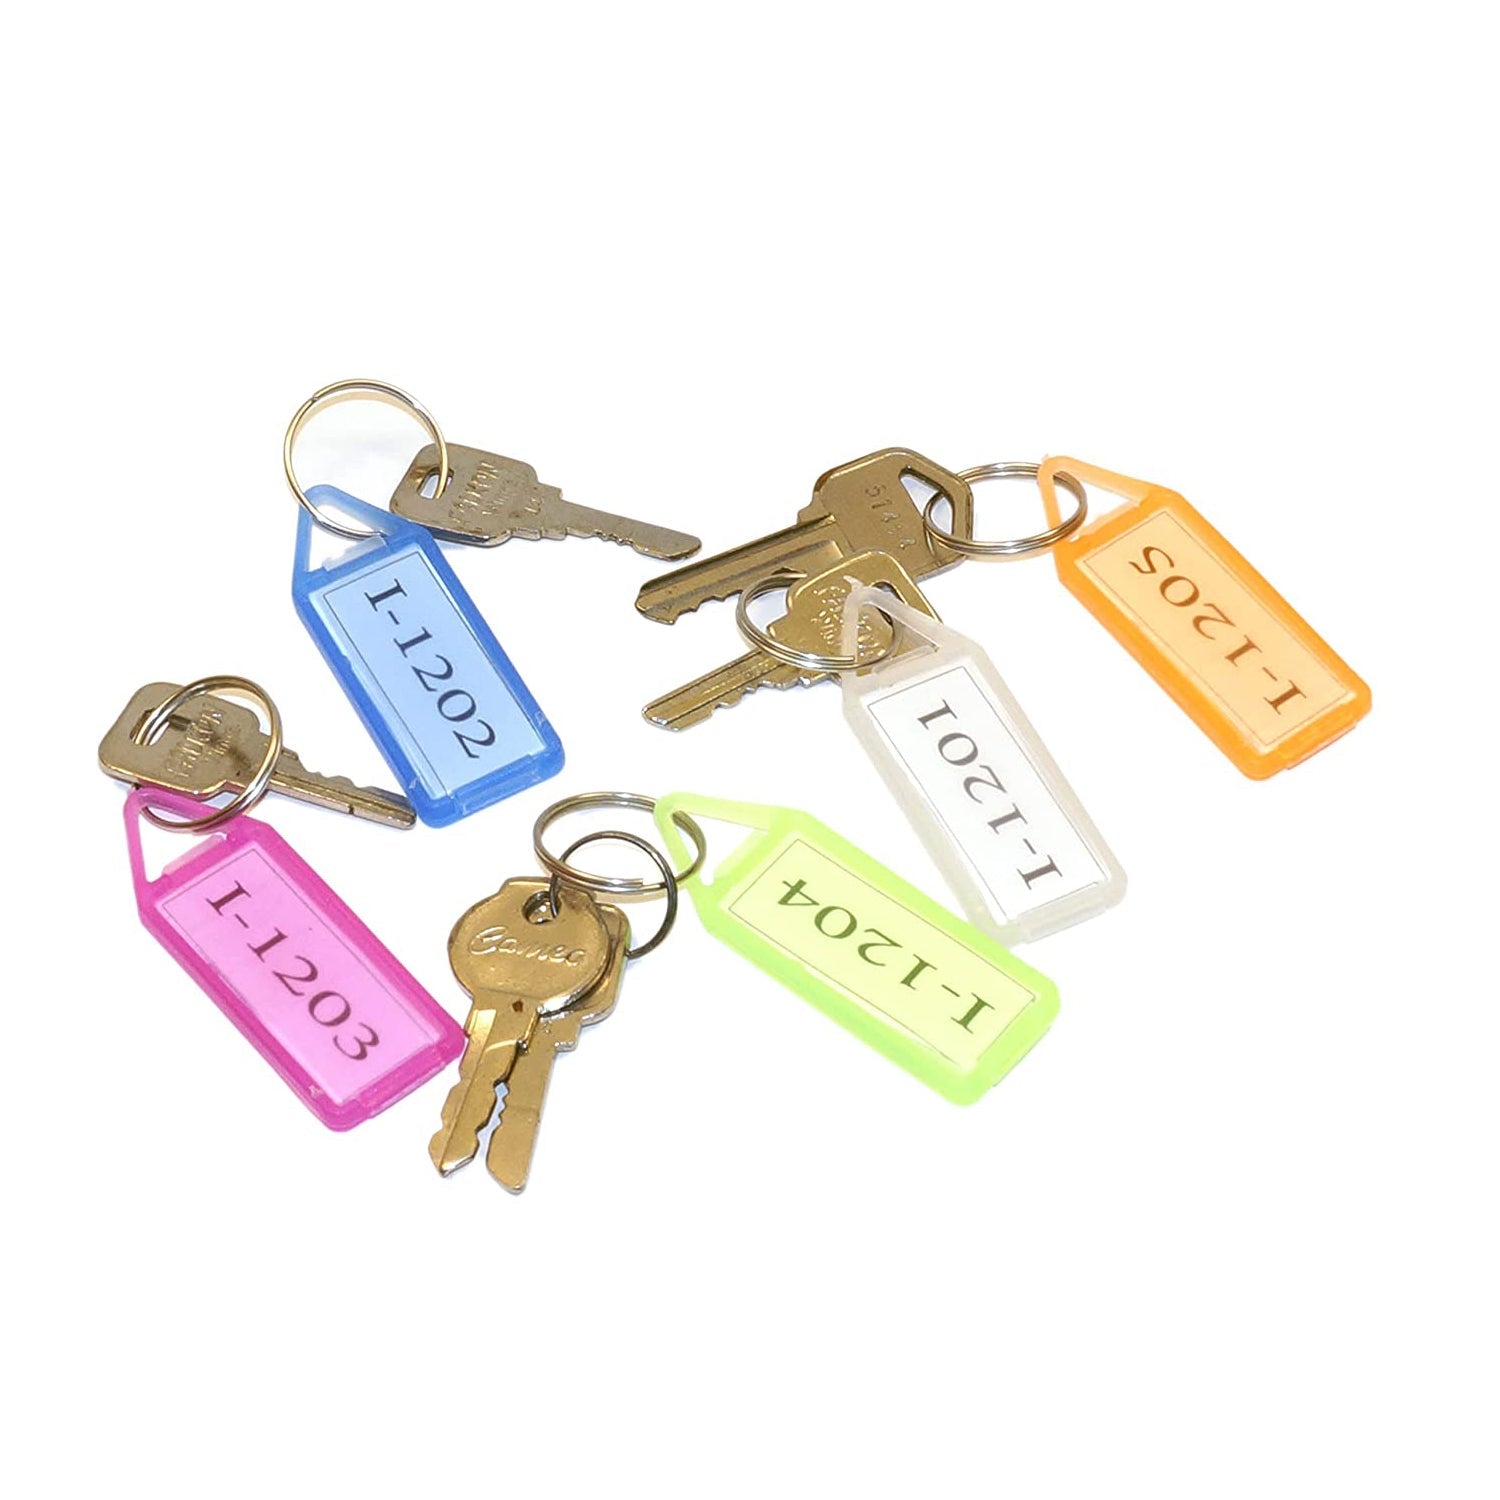 6170 50Pc Keychain Tag Label Used For Decorative Purpose On Keys And All. freeshipping - DeoDap